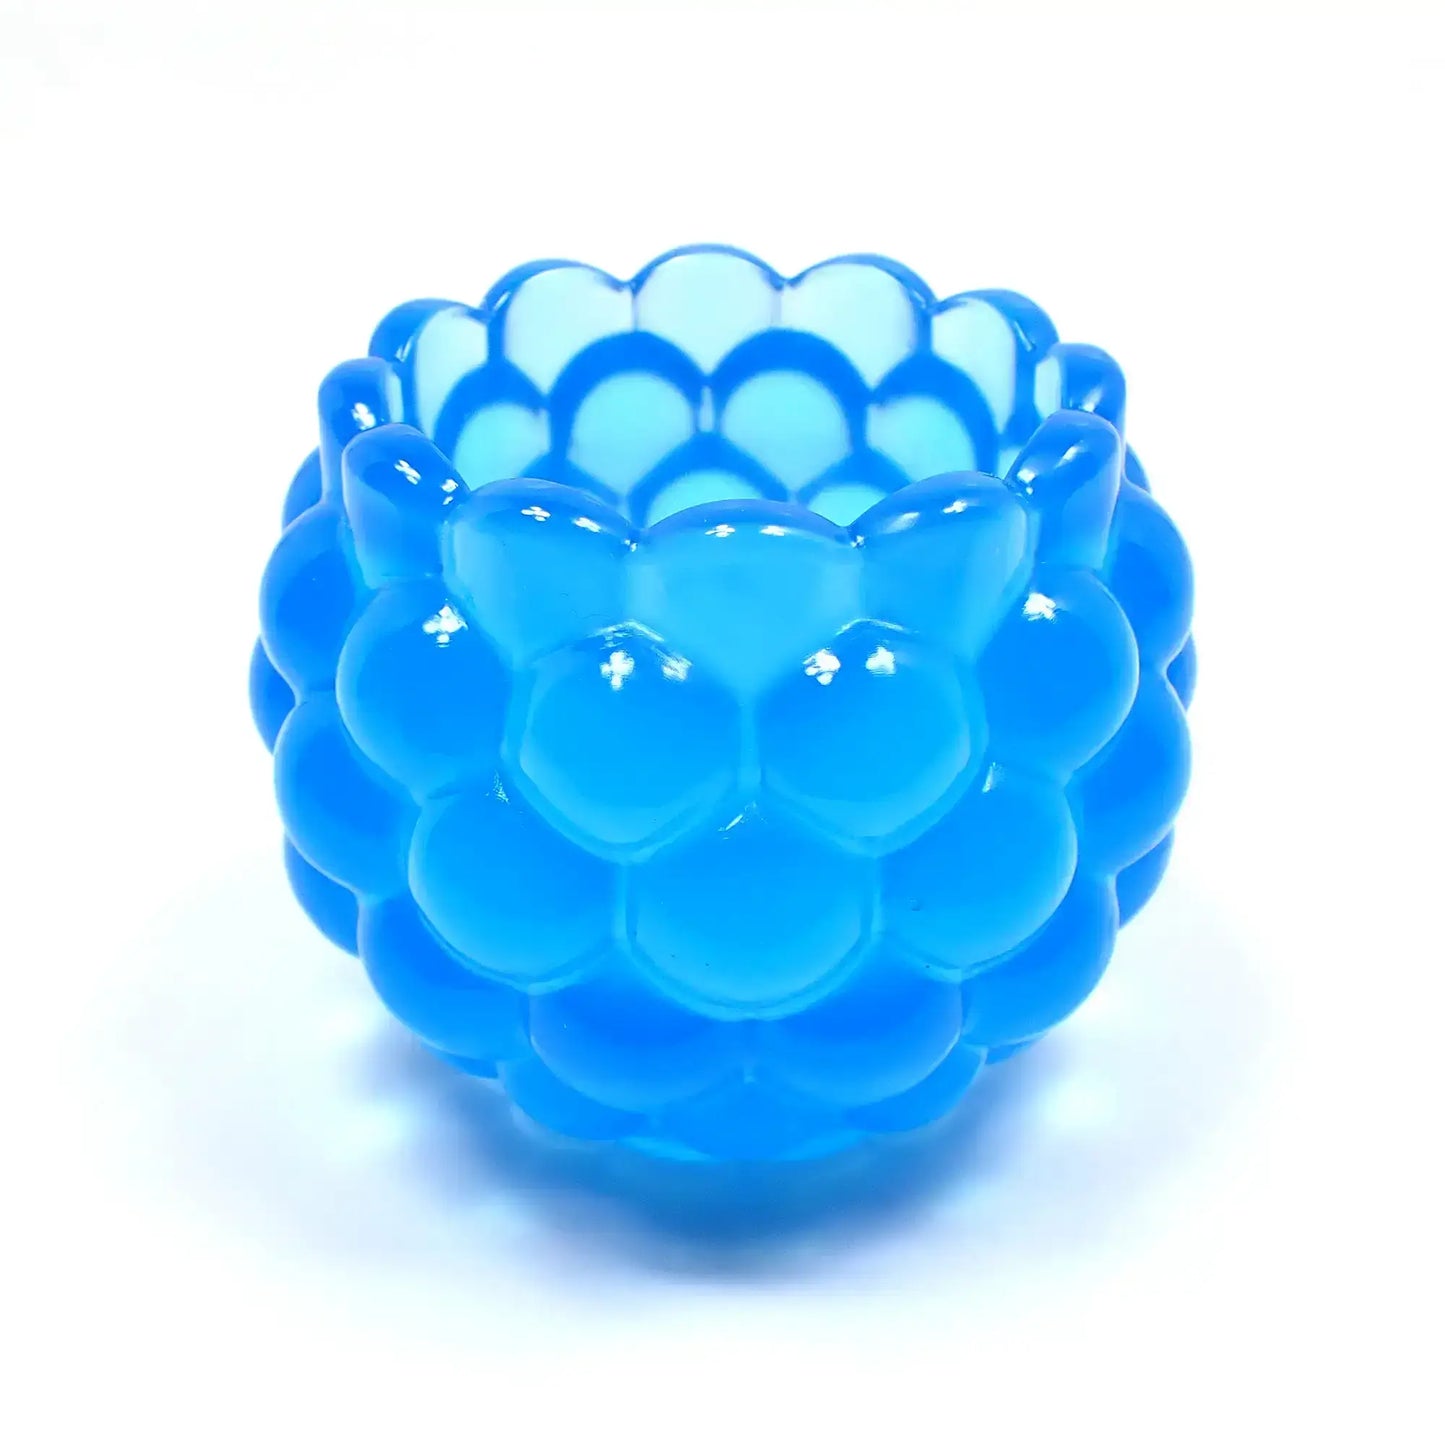 Side view of the handmade resin decorative bowl. The resin is neon blue in color. It has a rounded shape with a bumpy round ball textured on the outside. The top tapers slightly and has a scalloped edge.